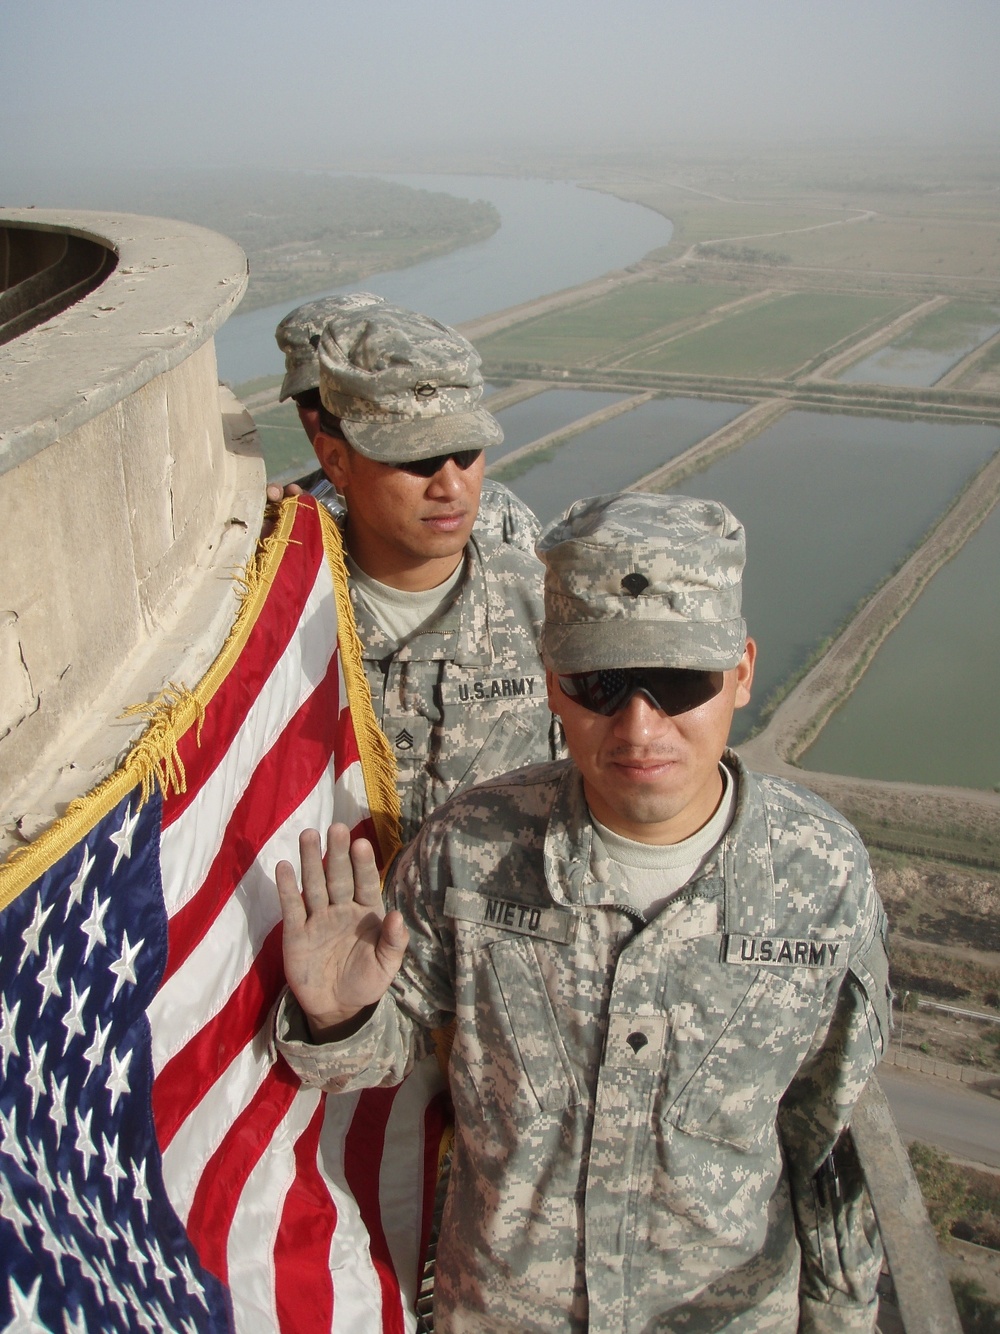 Soldier re-enlists 340 feet off the ground